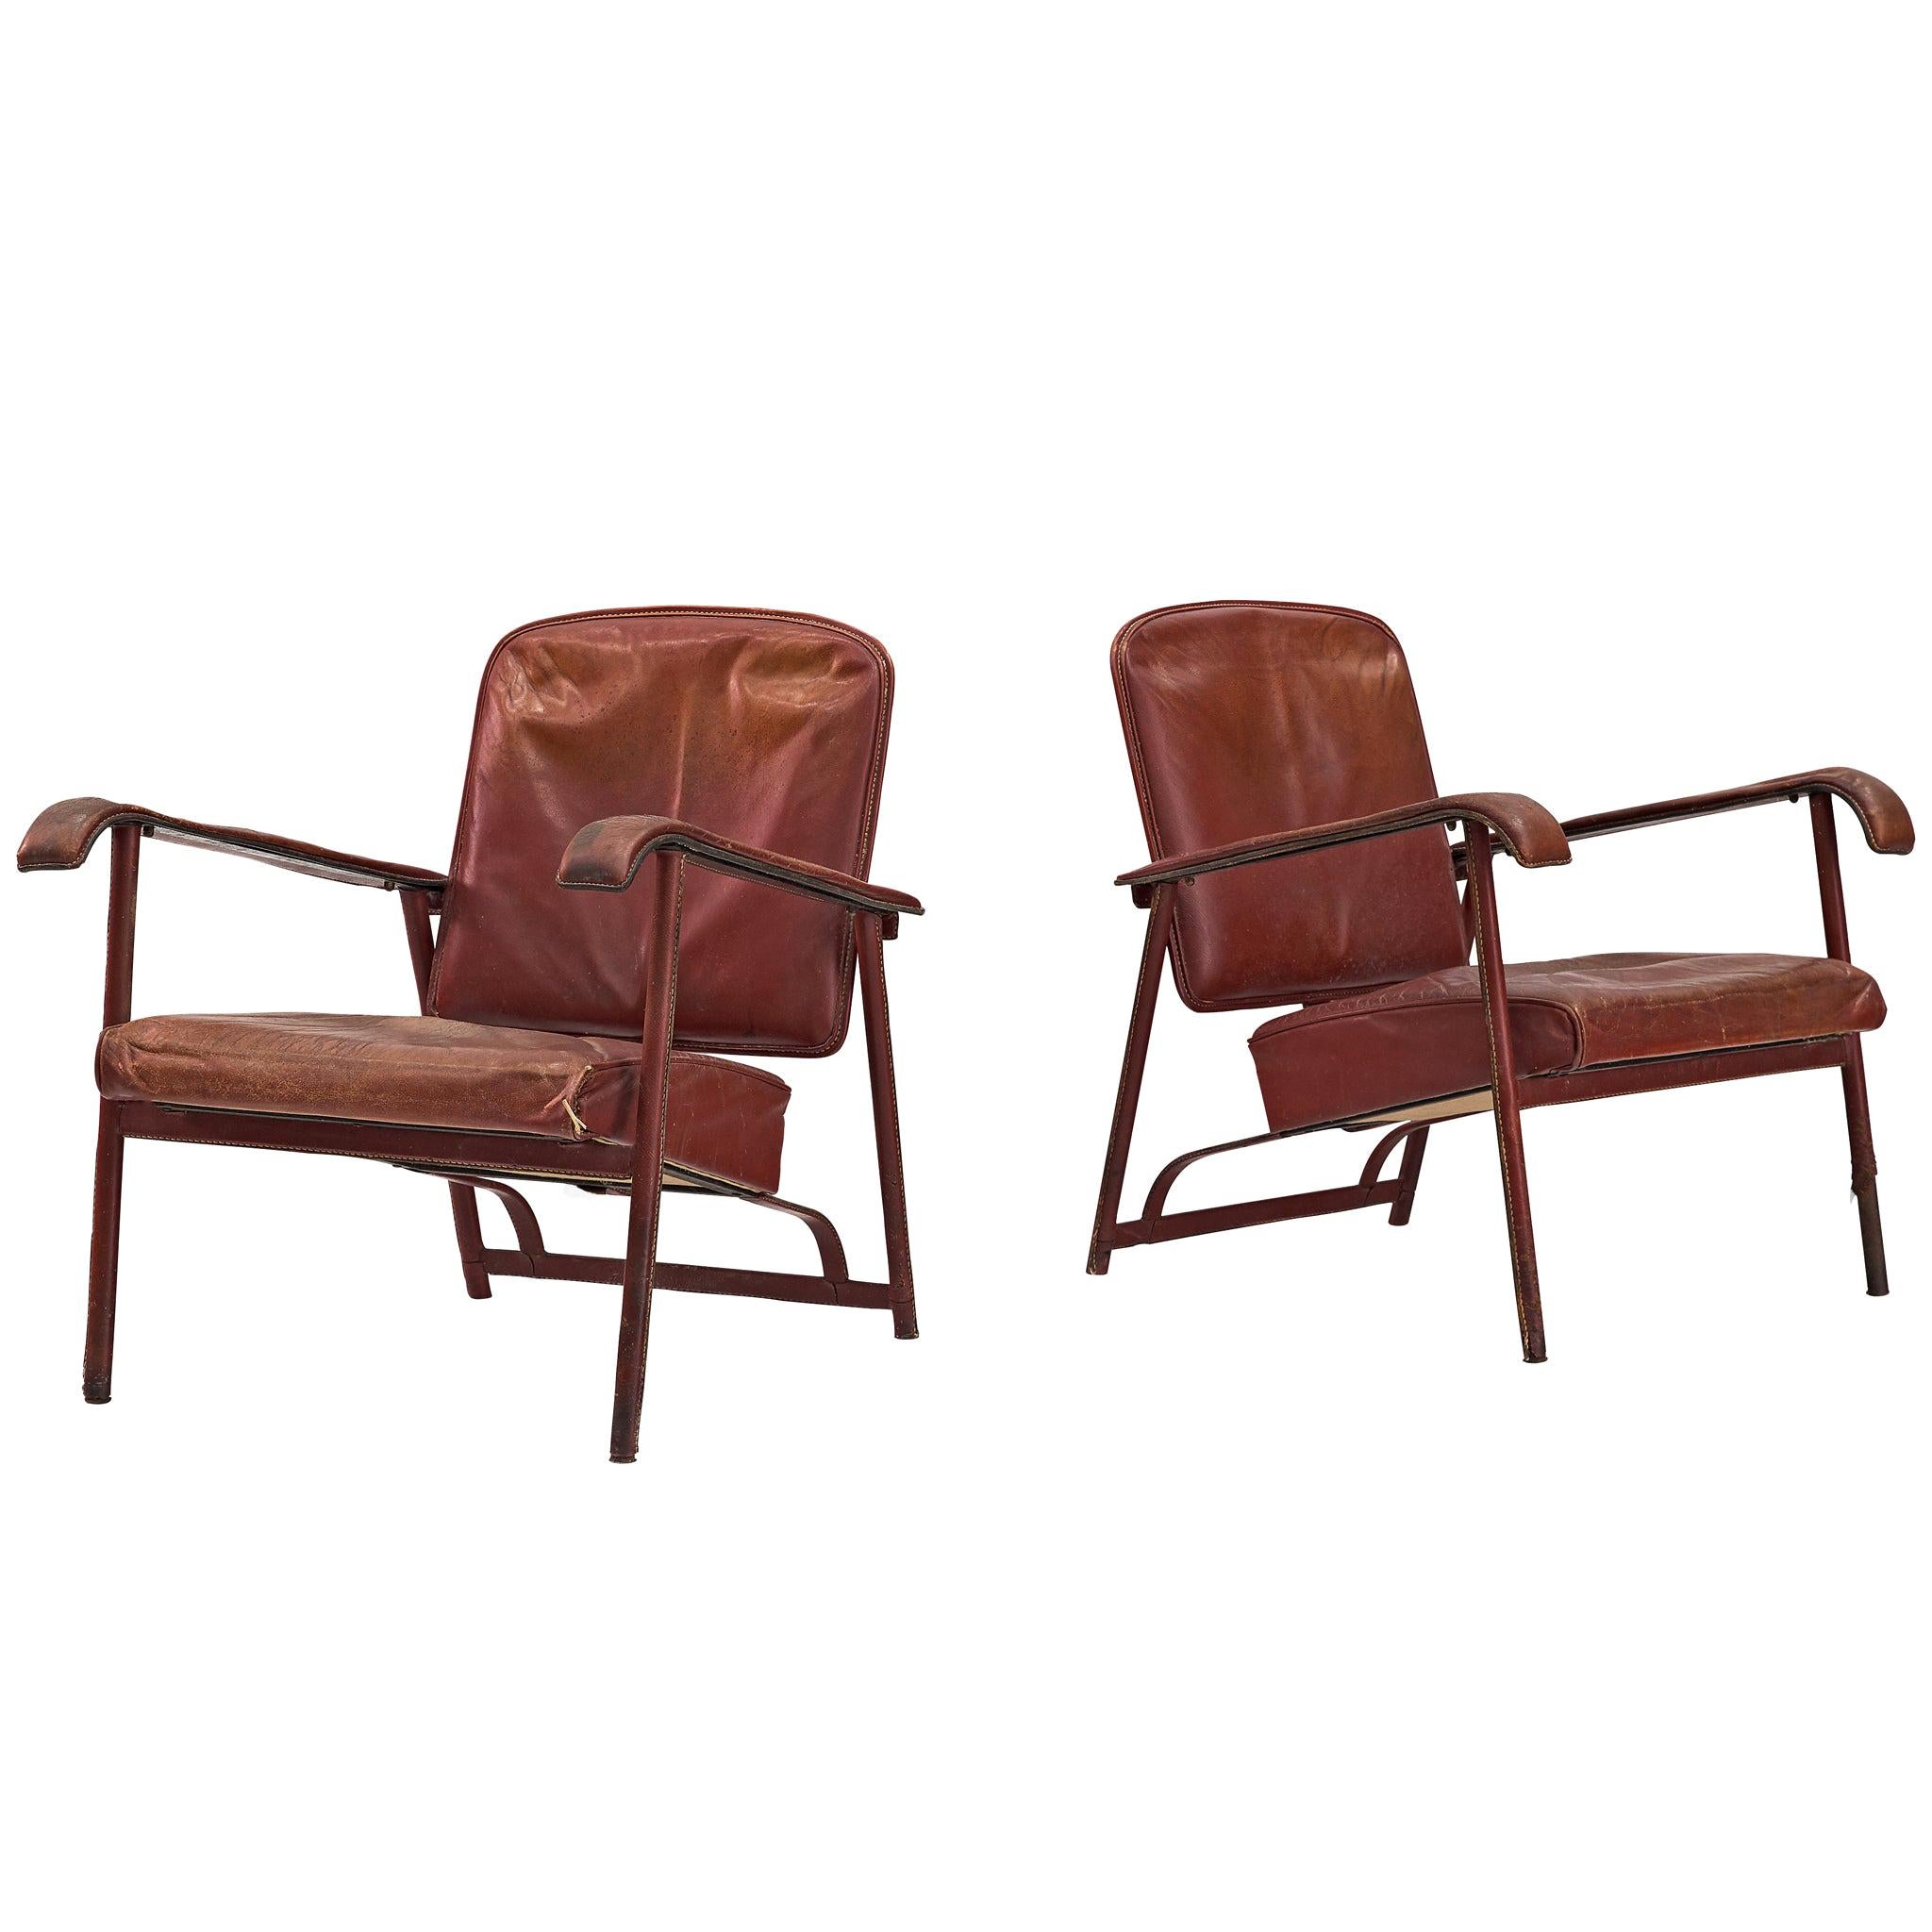 Pair of Lounge Chairs in Patinated Burgundy Leather by Jacques Adnet